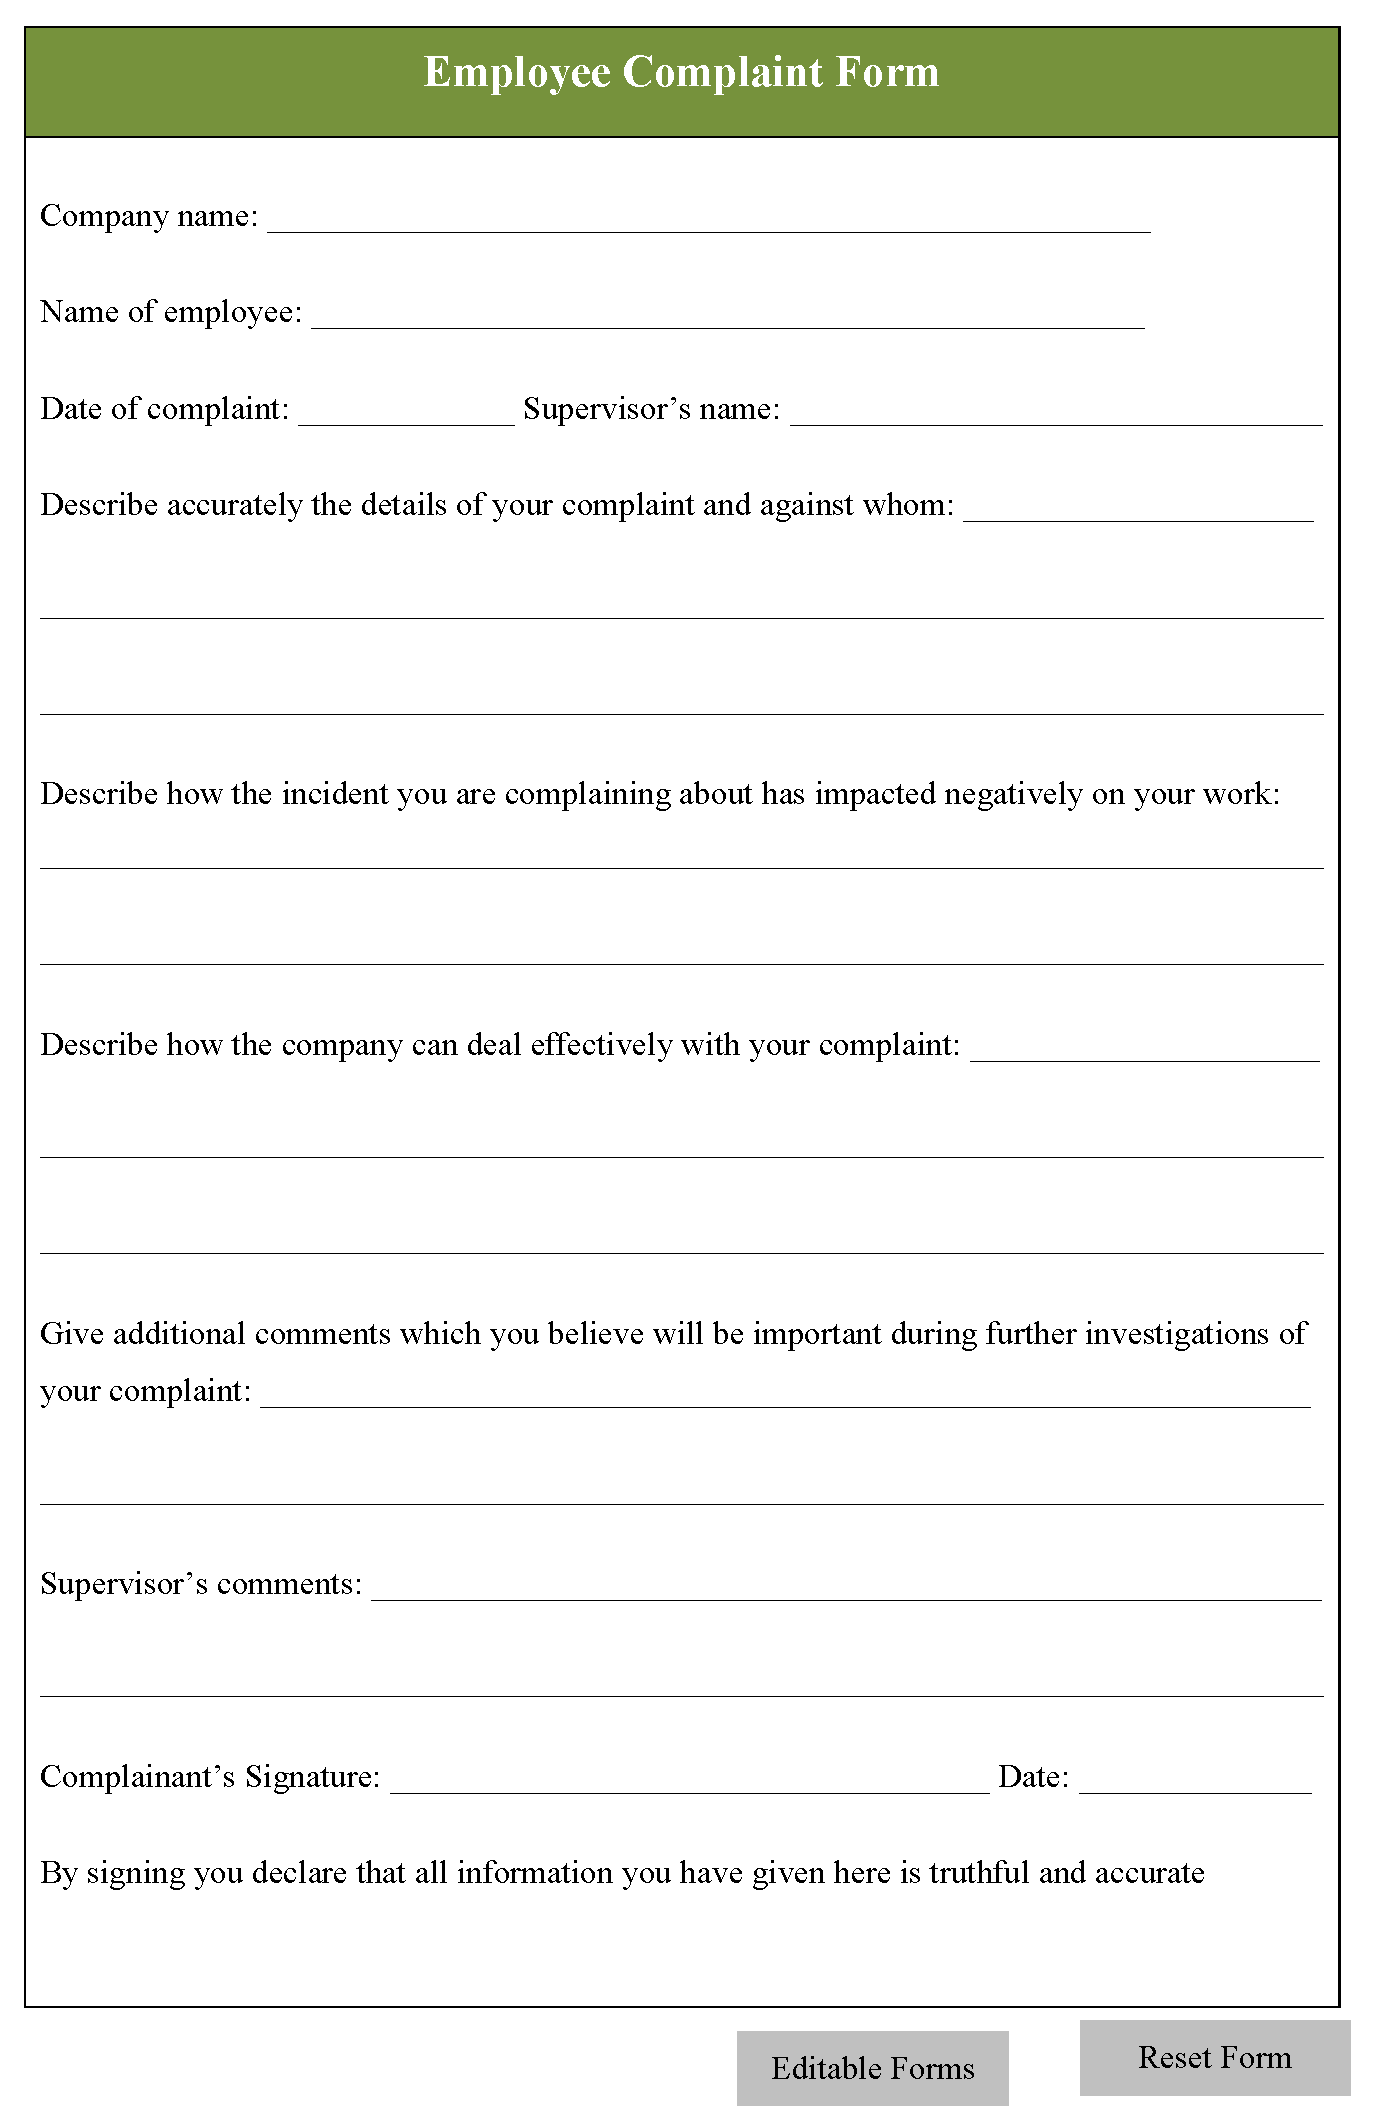 employee-complaint-form-editable-forms